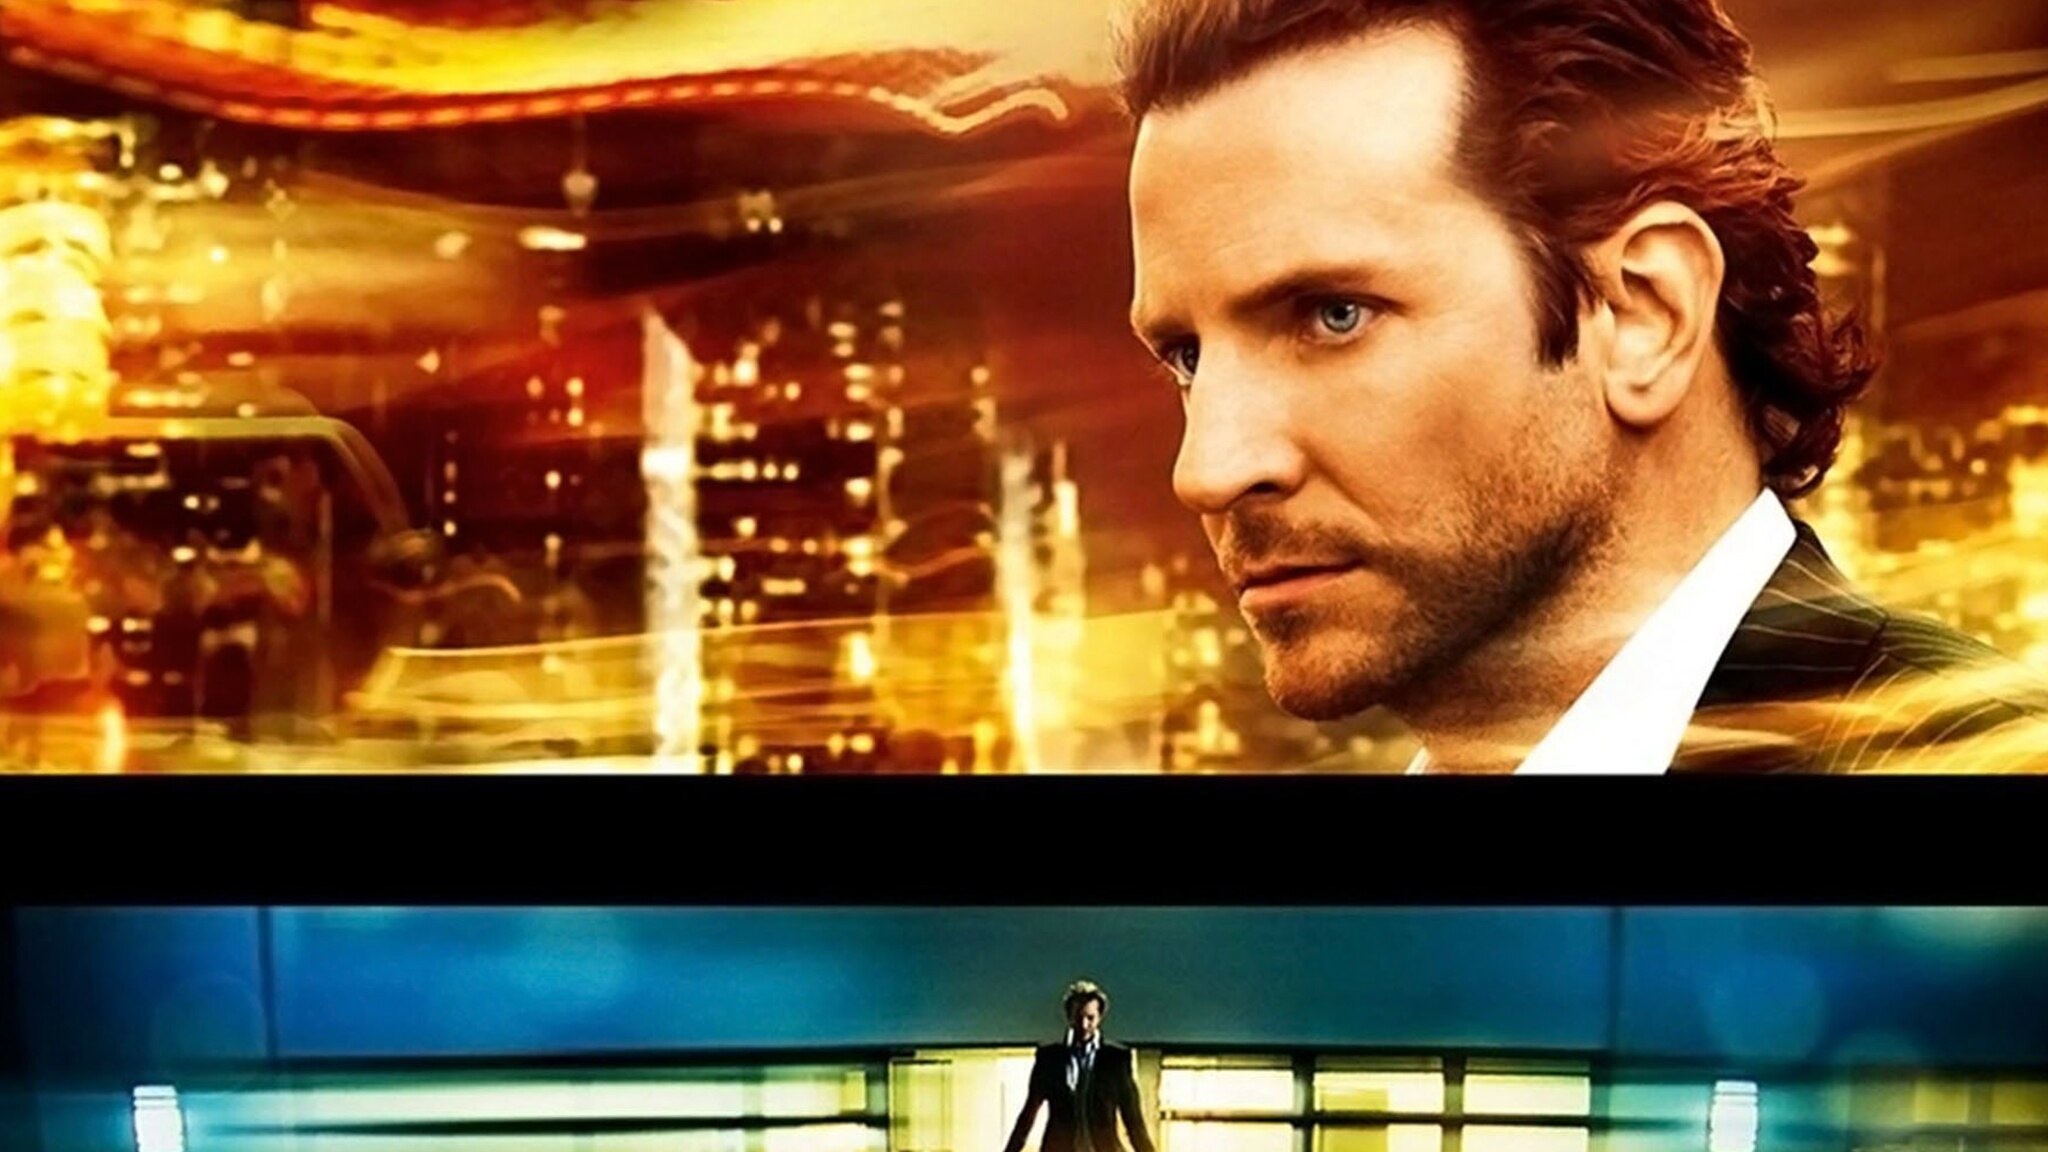 Limitless movie, Boundless potential, Edge-of-your-seat, Sophisticated storytelling, 2050x1160 HD Desktop